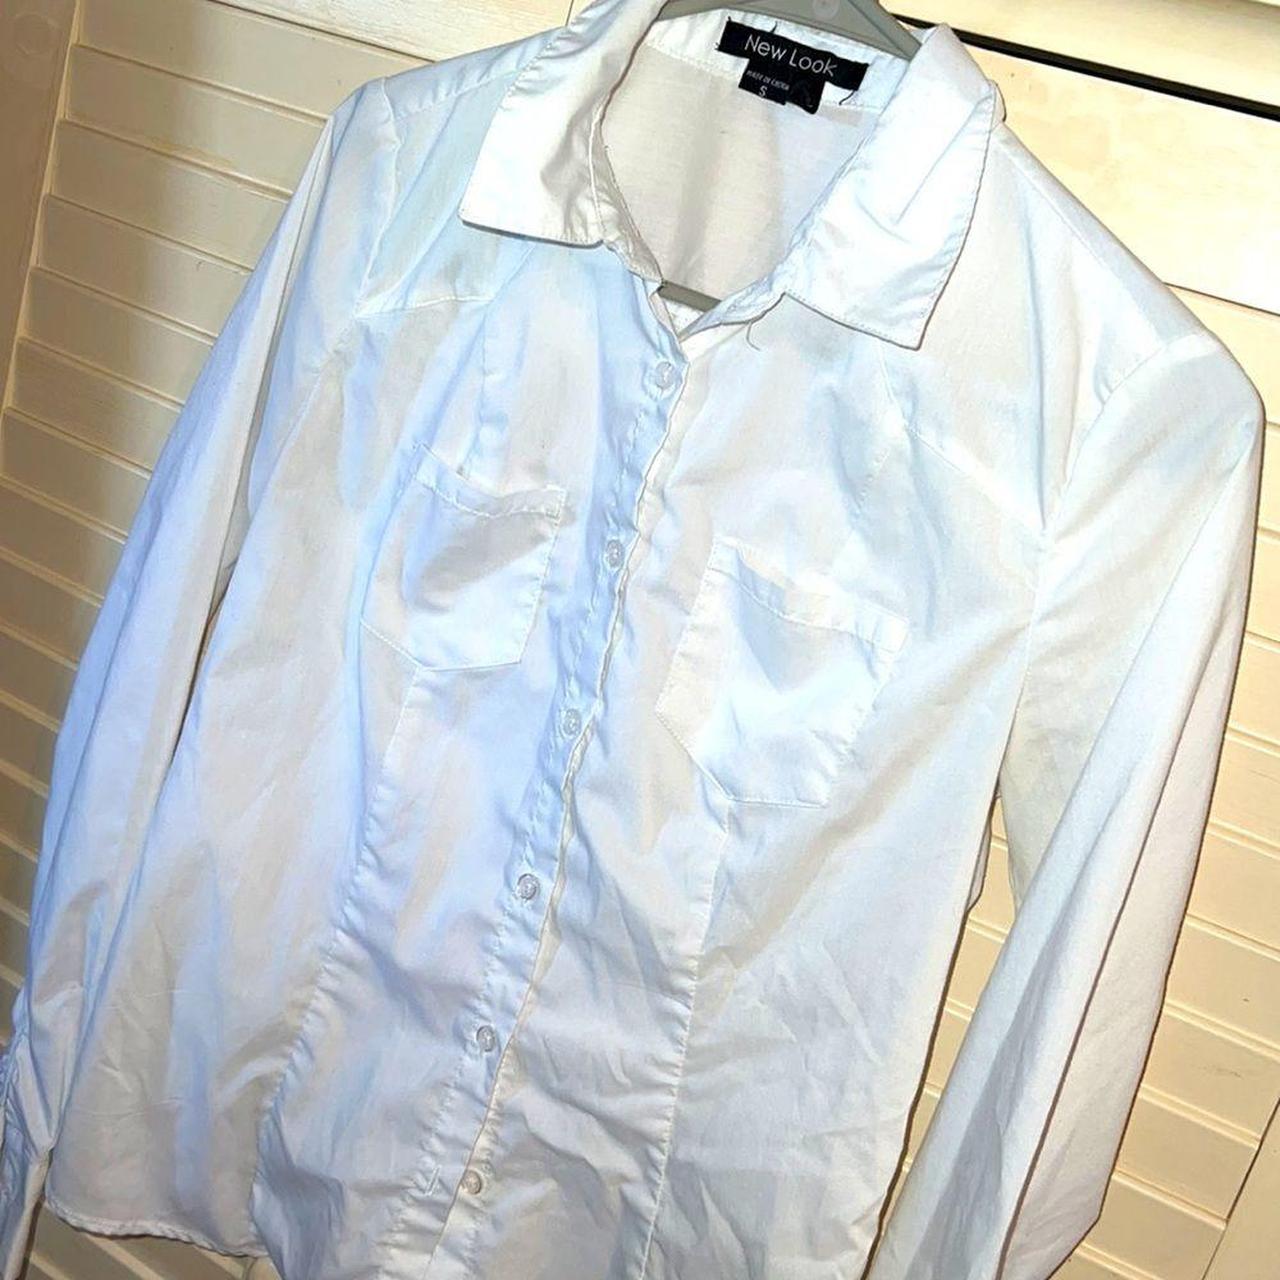 Product Image 3 - New look stretch button down